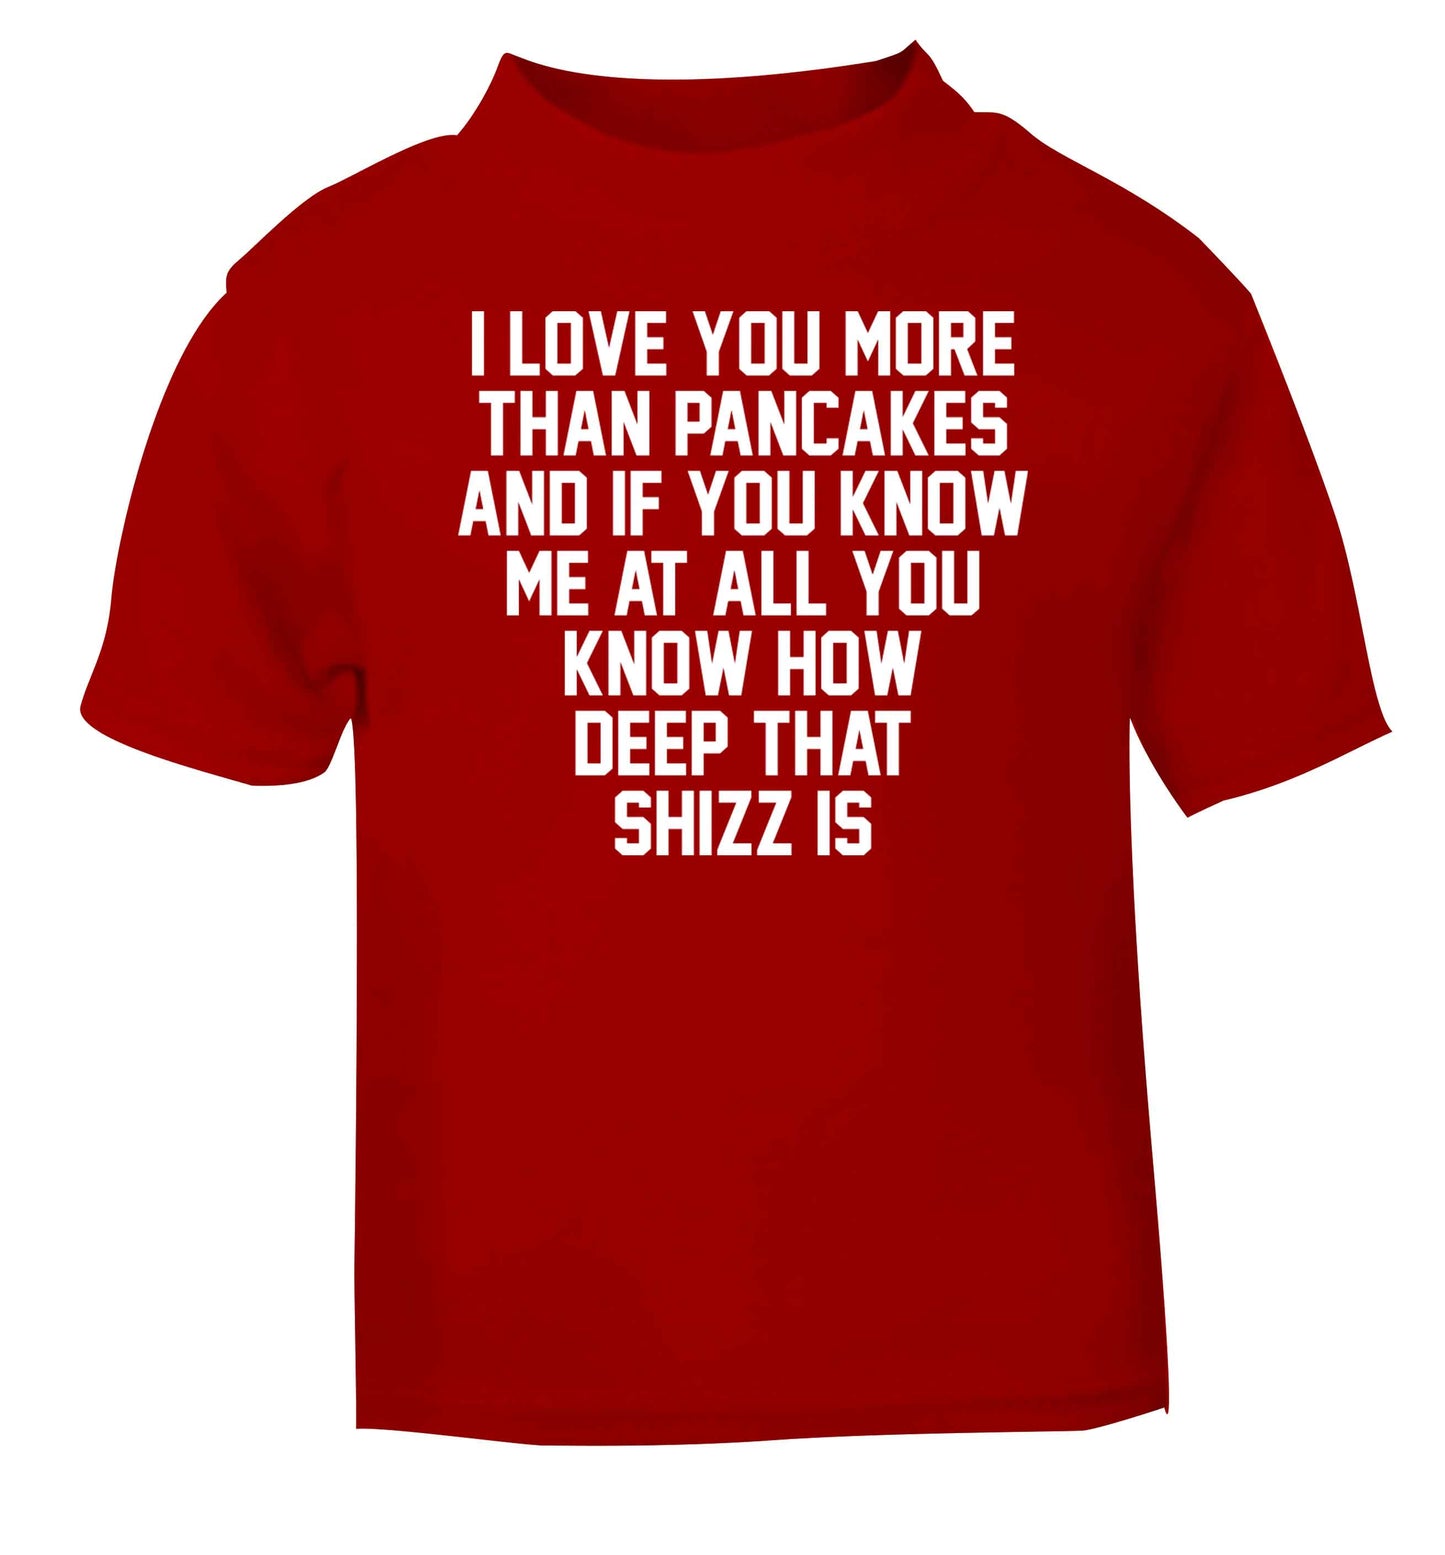 I love you more than pancakes and if you know me at all you know how deep that shizz is red baby toddler Tshirt 2 Years